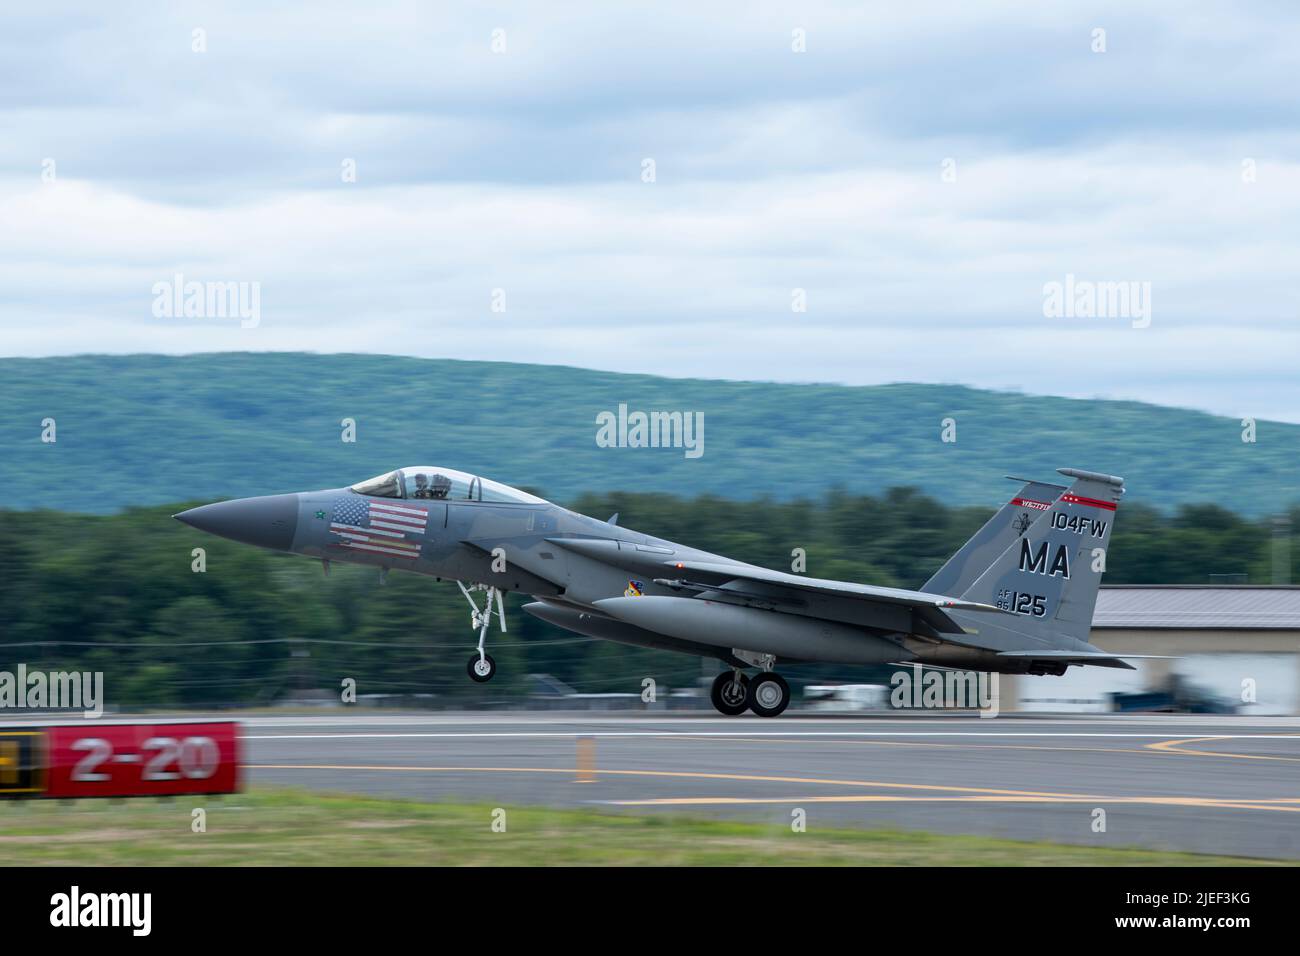 A U.S. Air Force F-15C Eagle, assigned to the 104th Fighter Wing, lands June 16, 2022, at Barnes Air National Guard Base, Massachusetts. The 104FW is trained to provide around-the-clock Aerospace Control Alert, providing armed F-15 fighters ready to scramble in a moment’s notice to protect the northeast United States from any airborne threat. (U.S. Air National Guard photo by Staff Sgt. Hanna Smith) Stock Photo